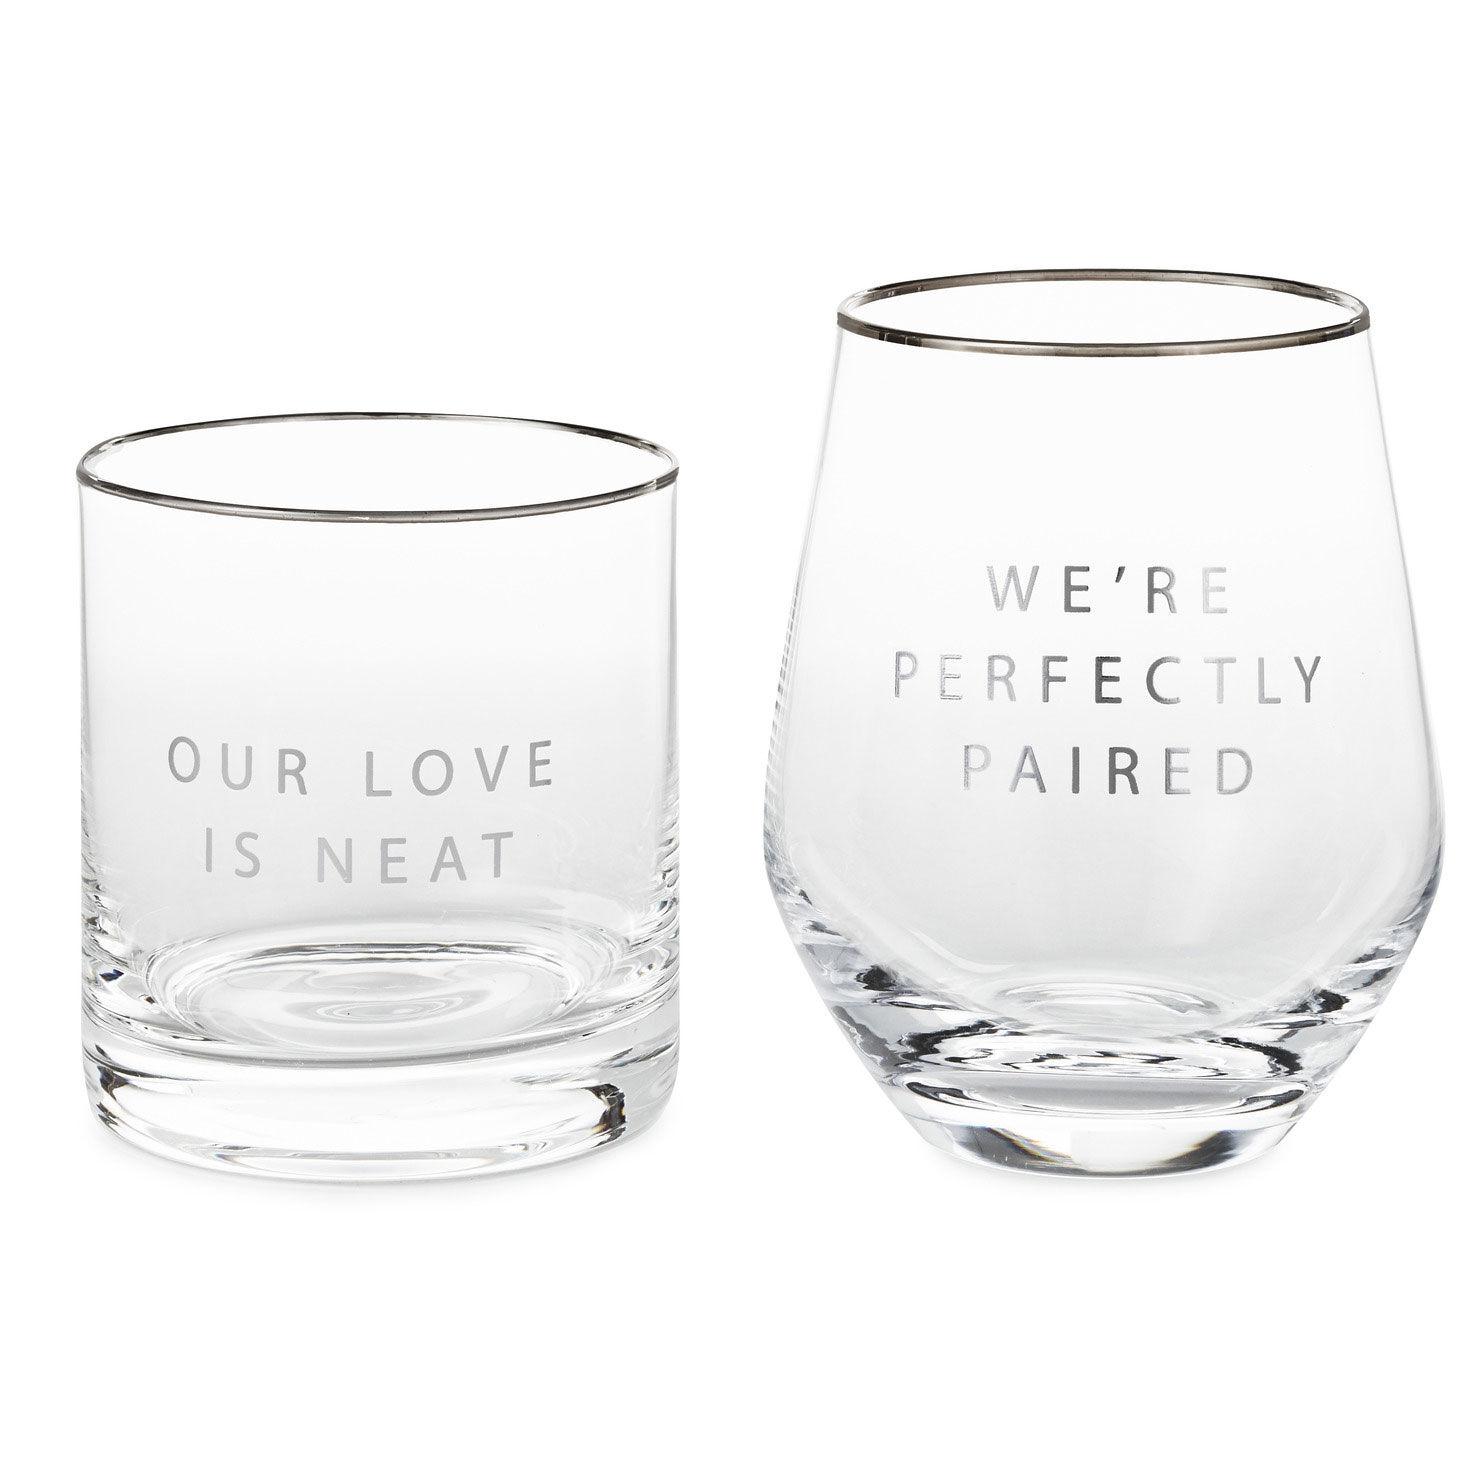 https://www.hallmark.com/dw/image/v2/AALB_PRD/on/demandware.static/-/Sites-hallmark-master/default/dw843d2eda/images/finished-goods/products/1ERL1189/Couples-Lowball-and-Stemless-Wine-Glass_1ERL1189_01.jpg?sfrm=jpg